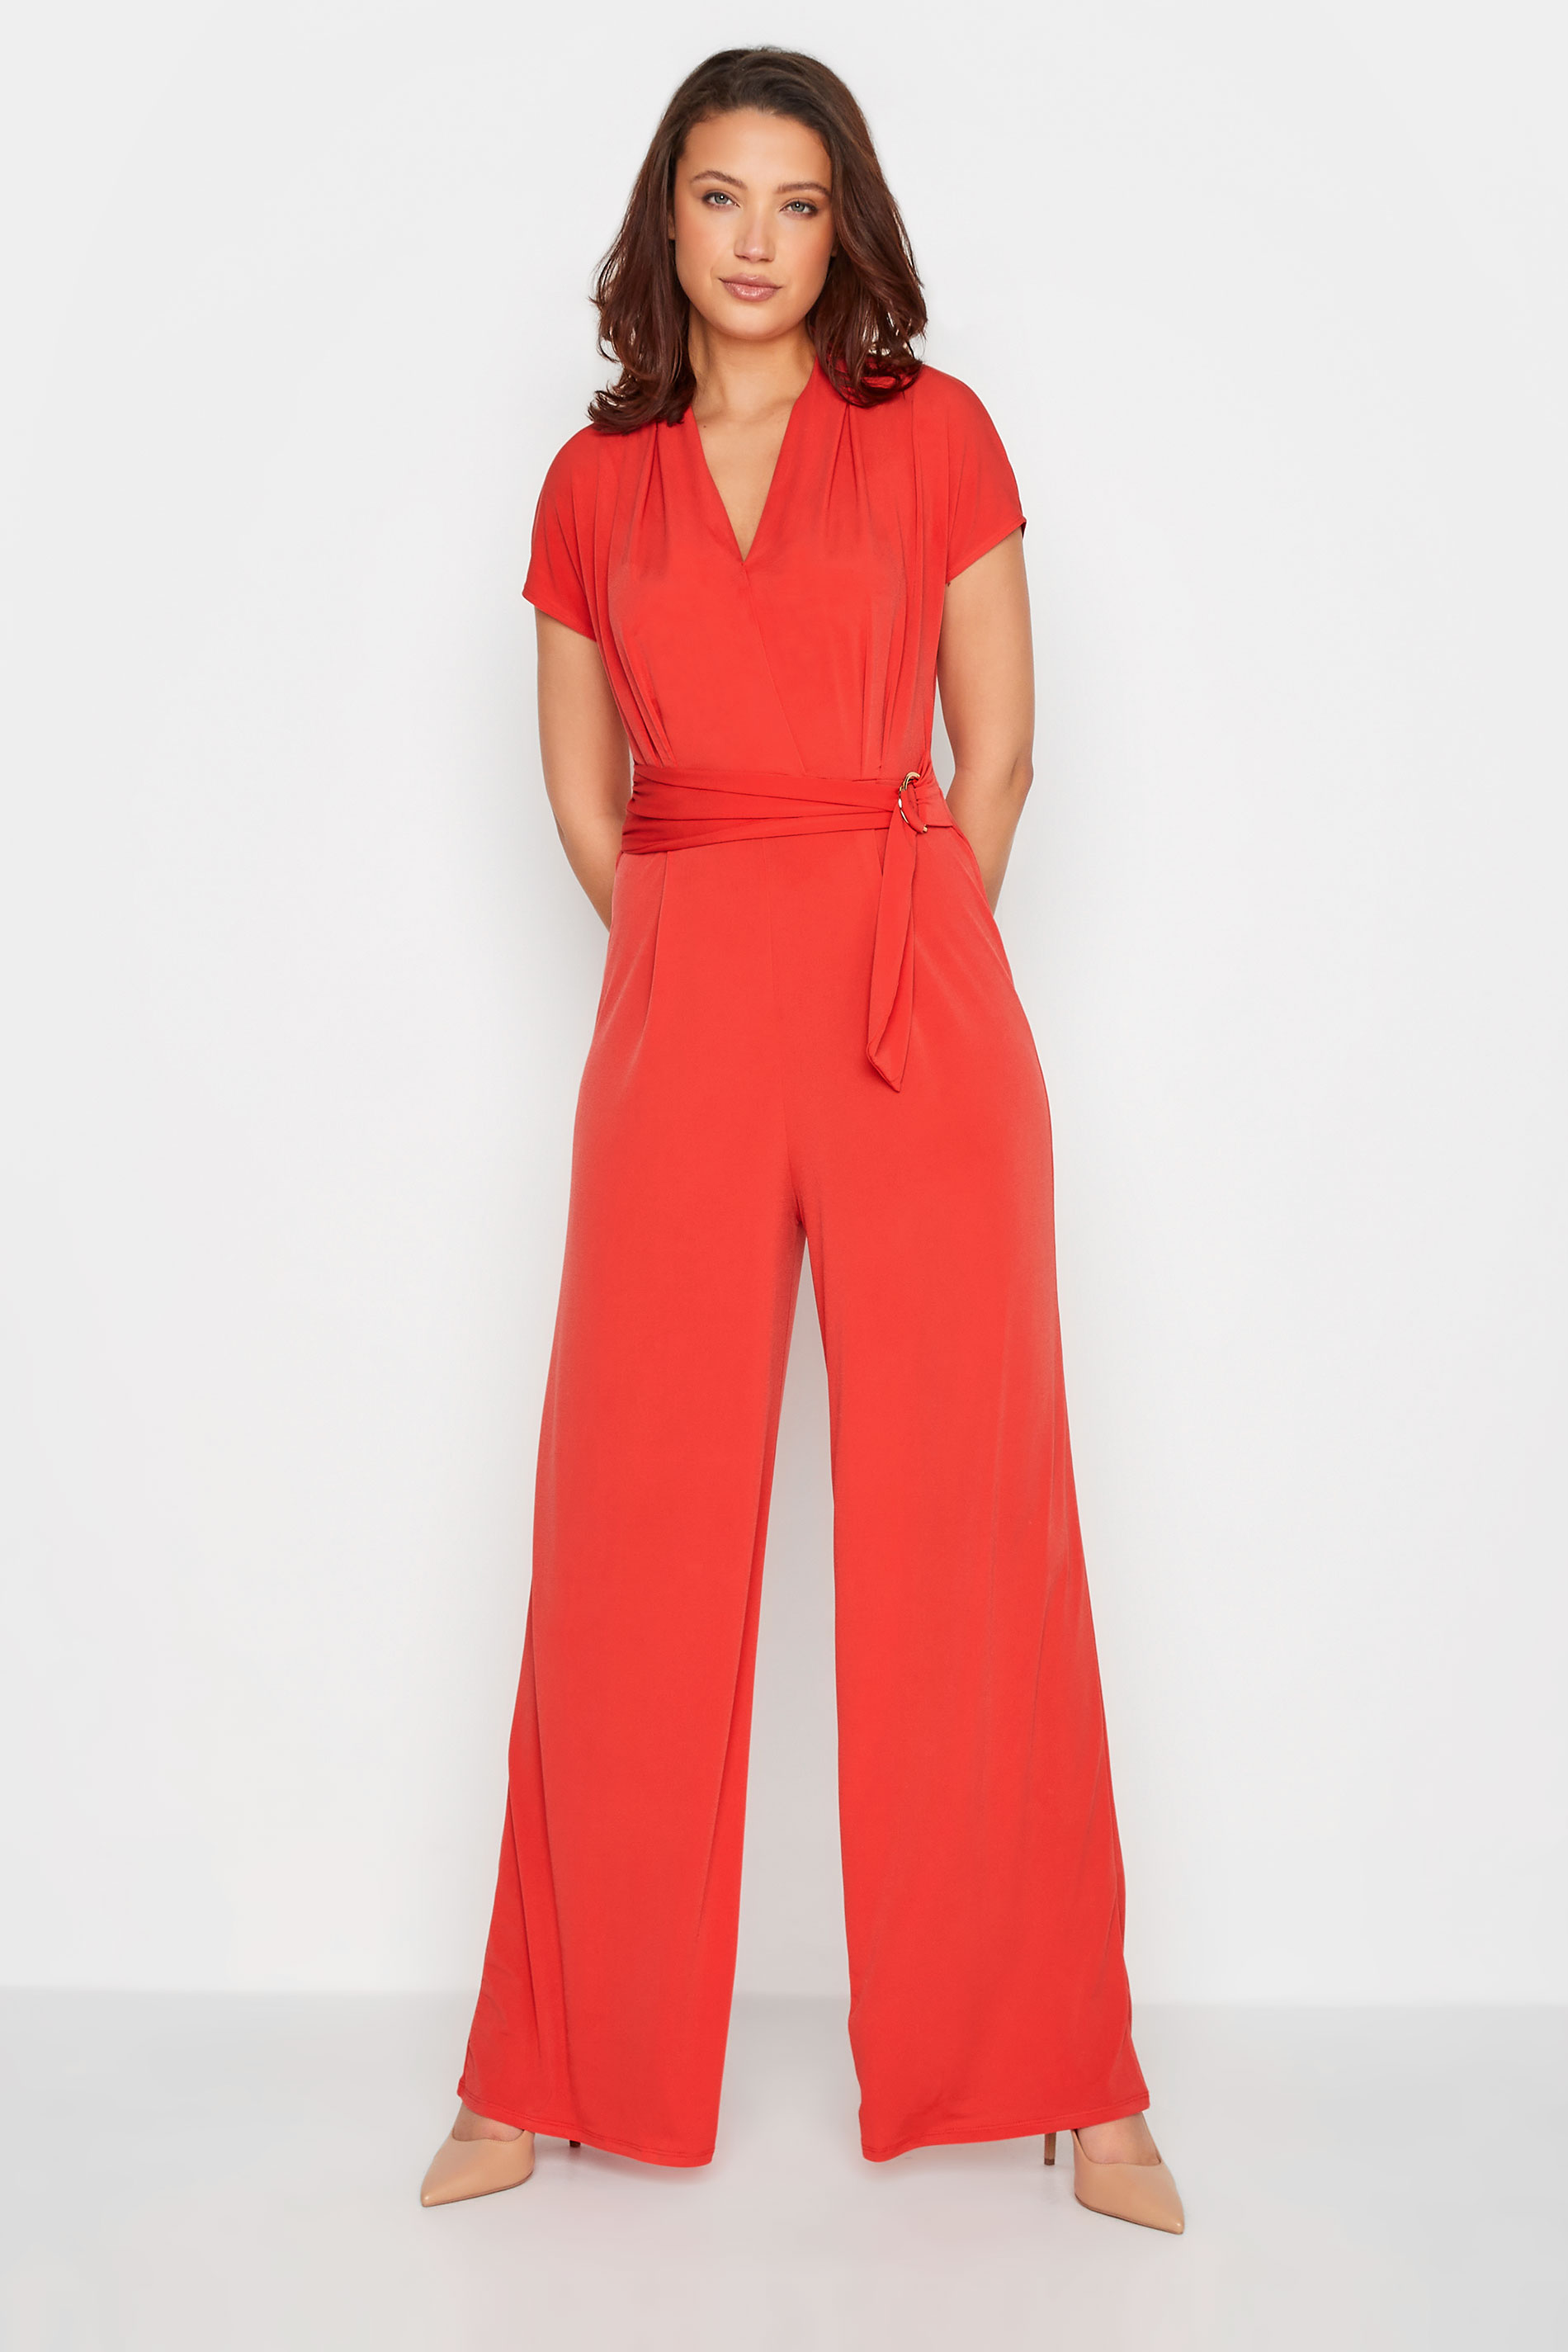 LTS Tall Women's Coral Orange Wrap Jumpsuit | Long Tall Sally  1